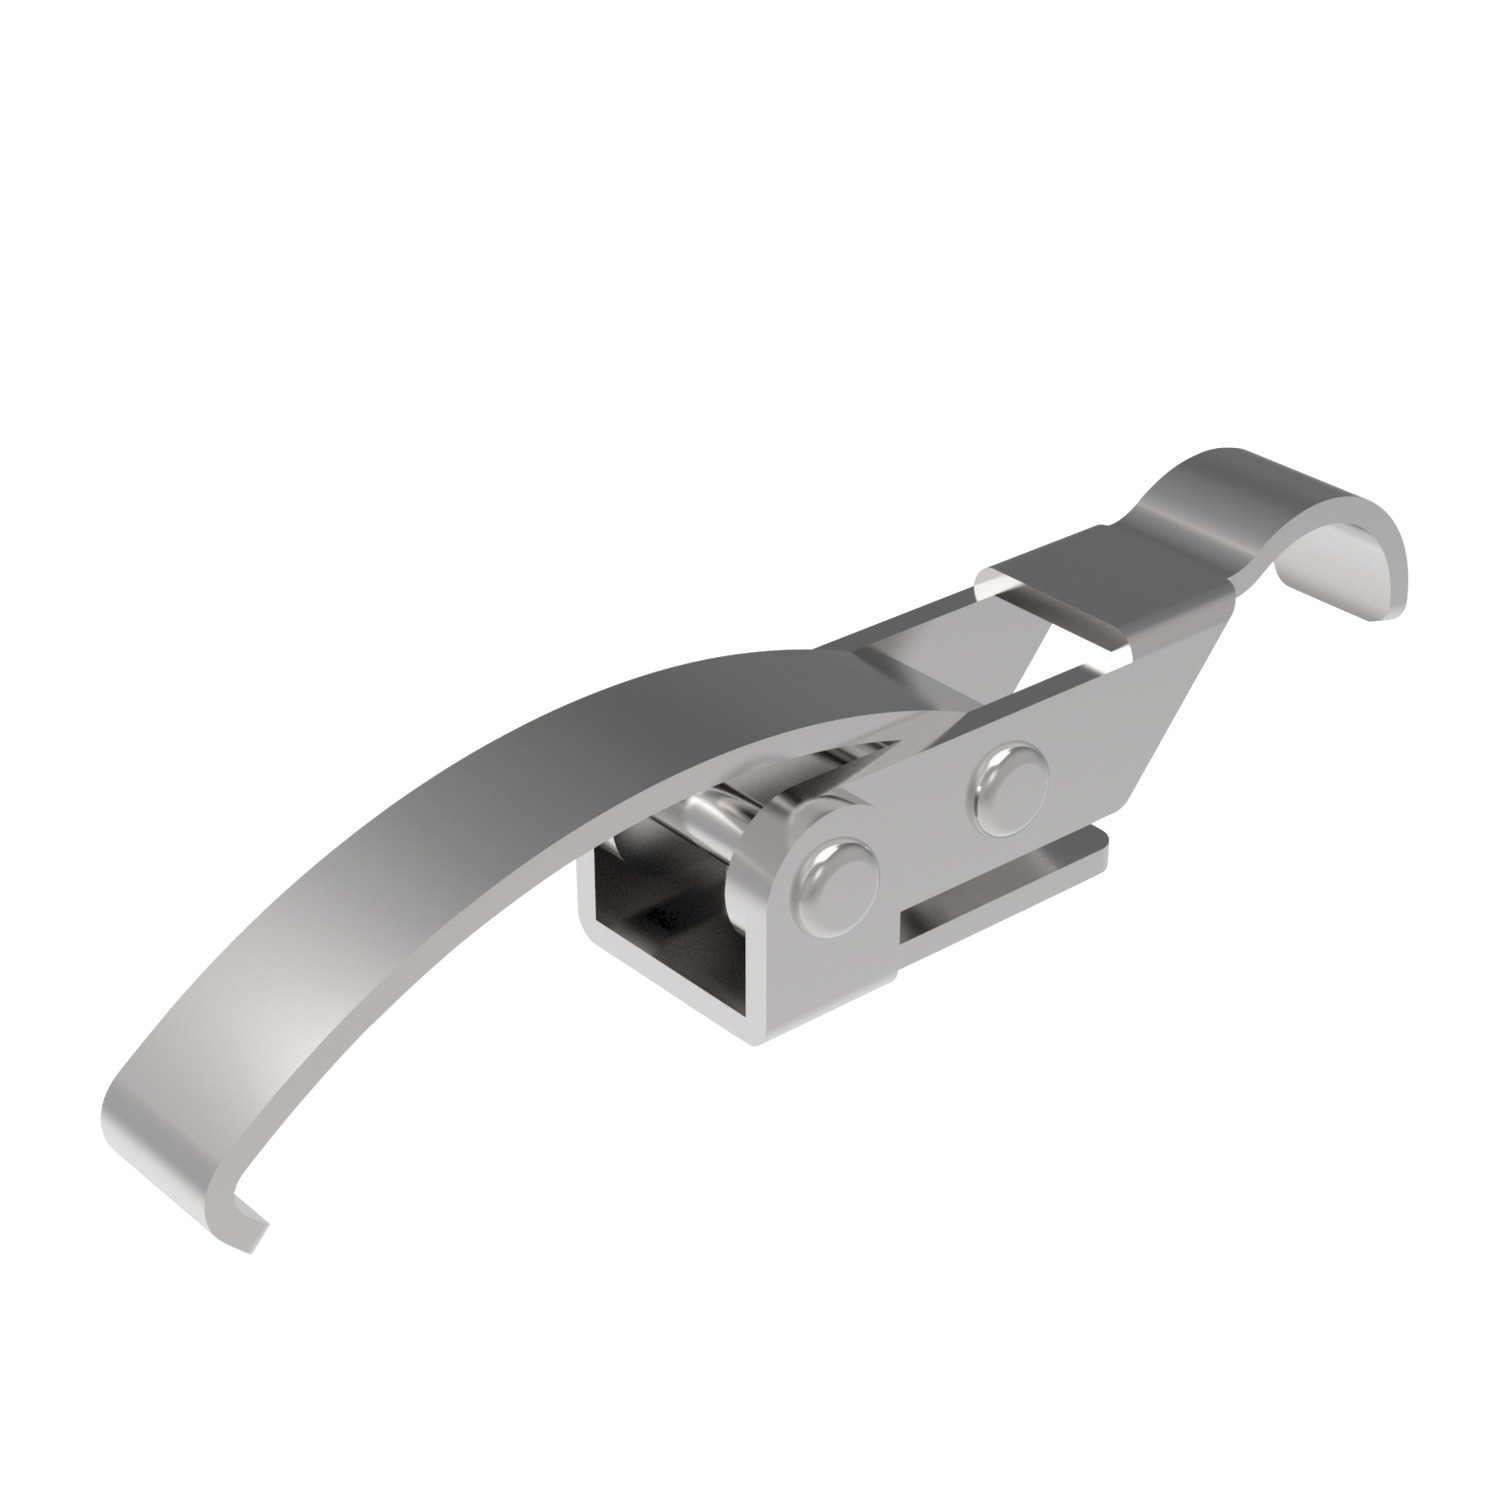 J0556.AC0030 Toggle Latches Stainless Steel - 90 - 17 - 17